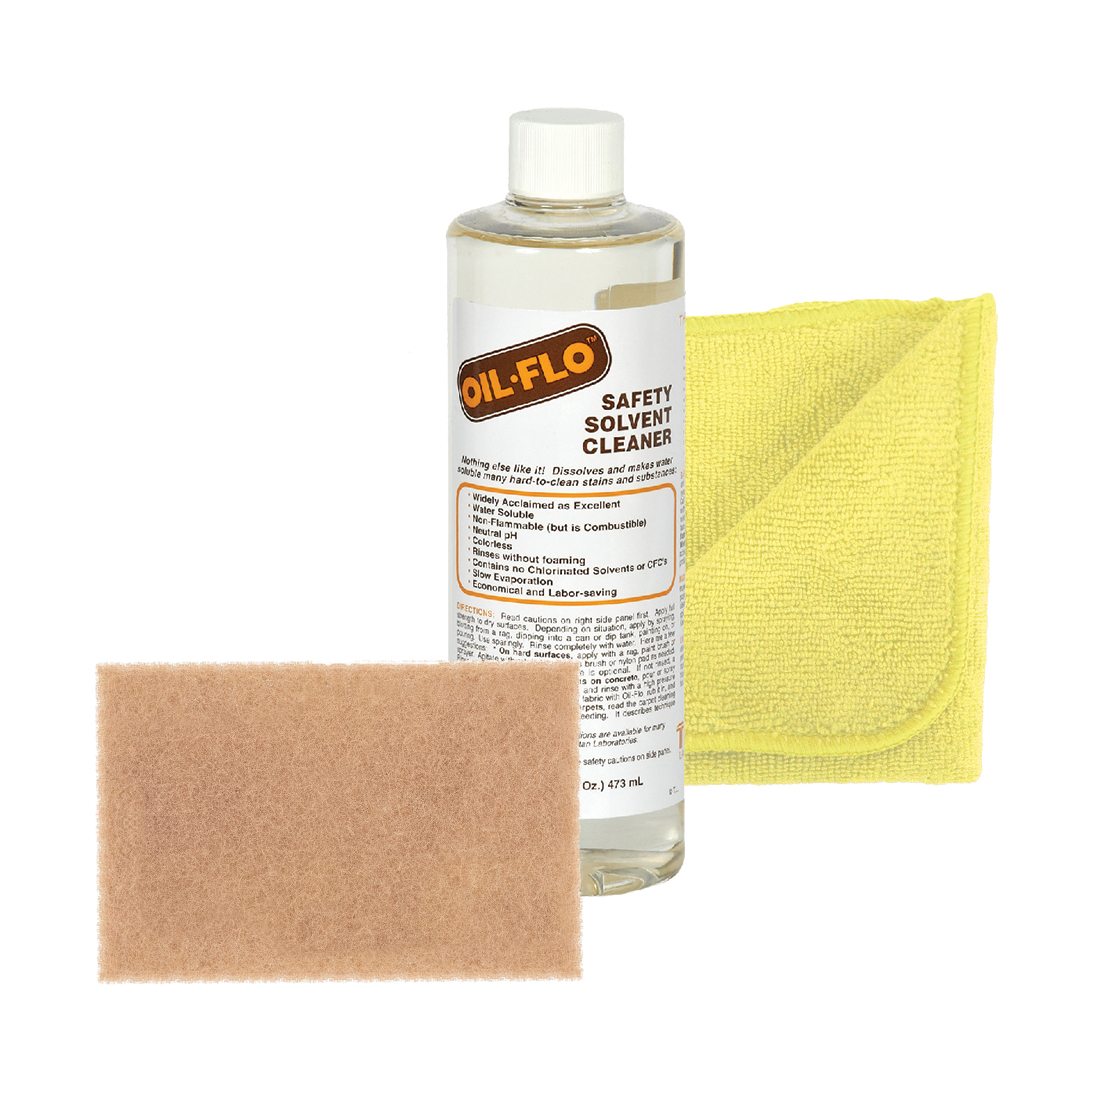 Adhesive Remover - First Products